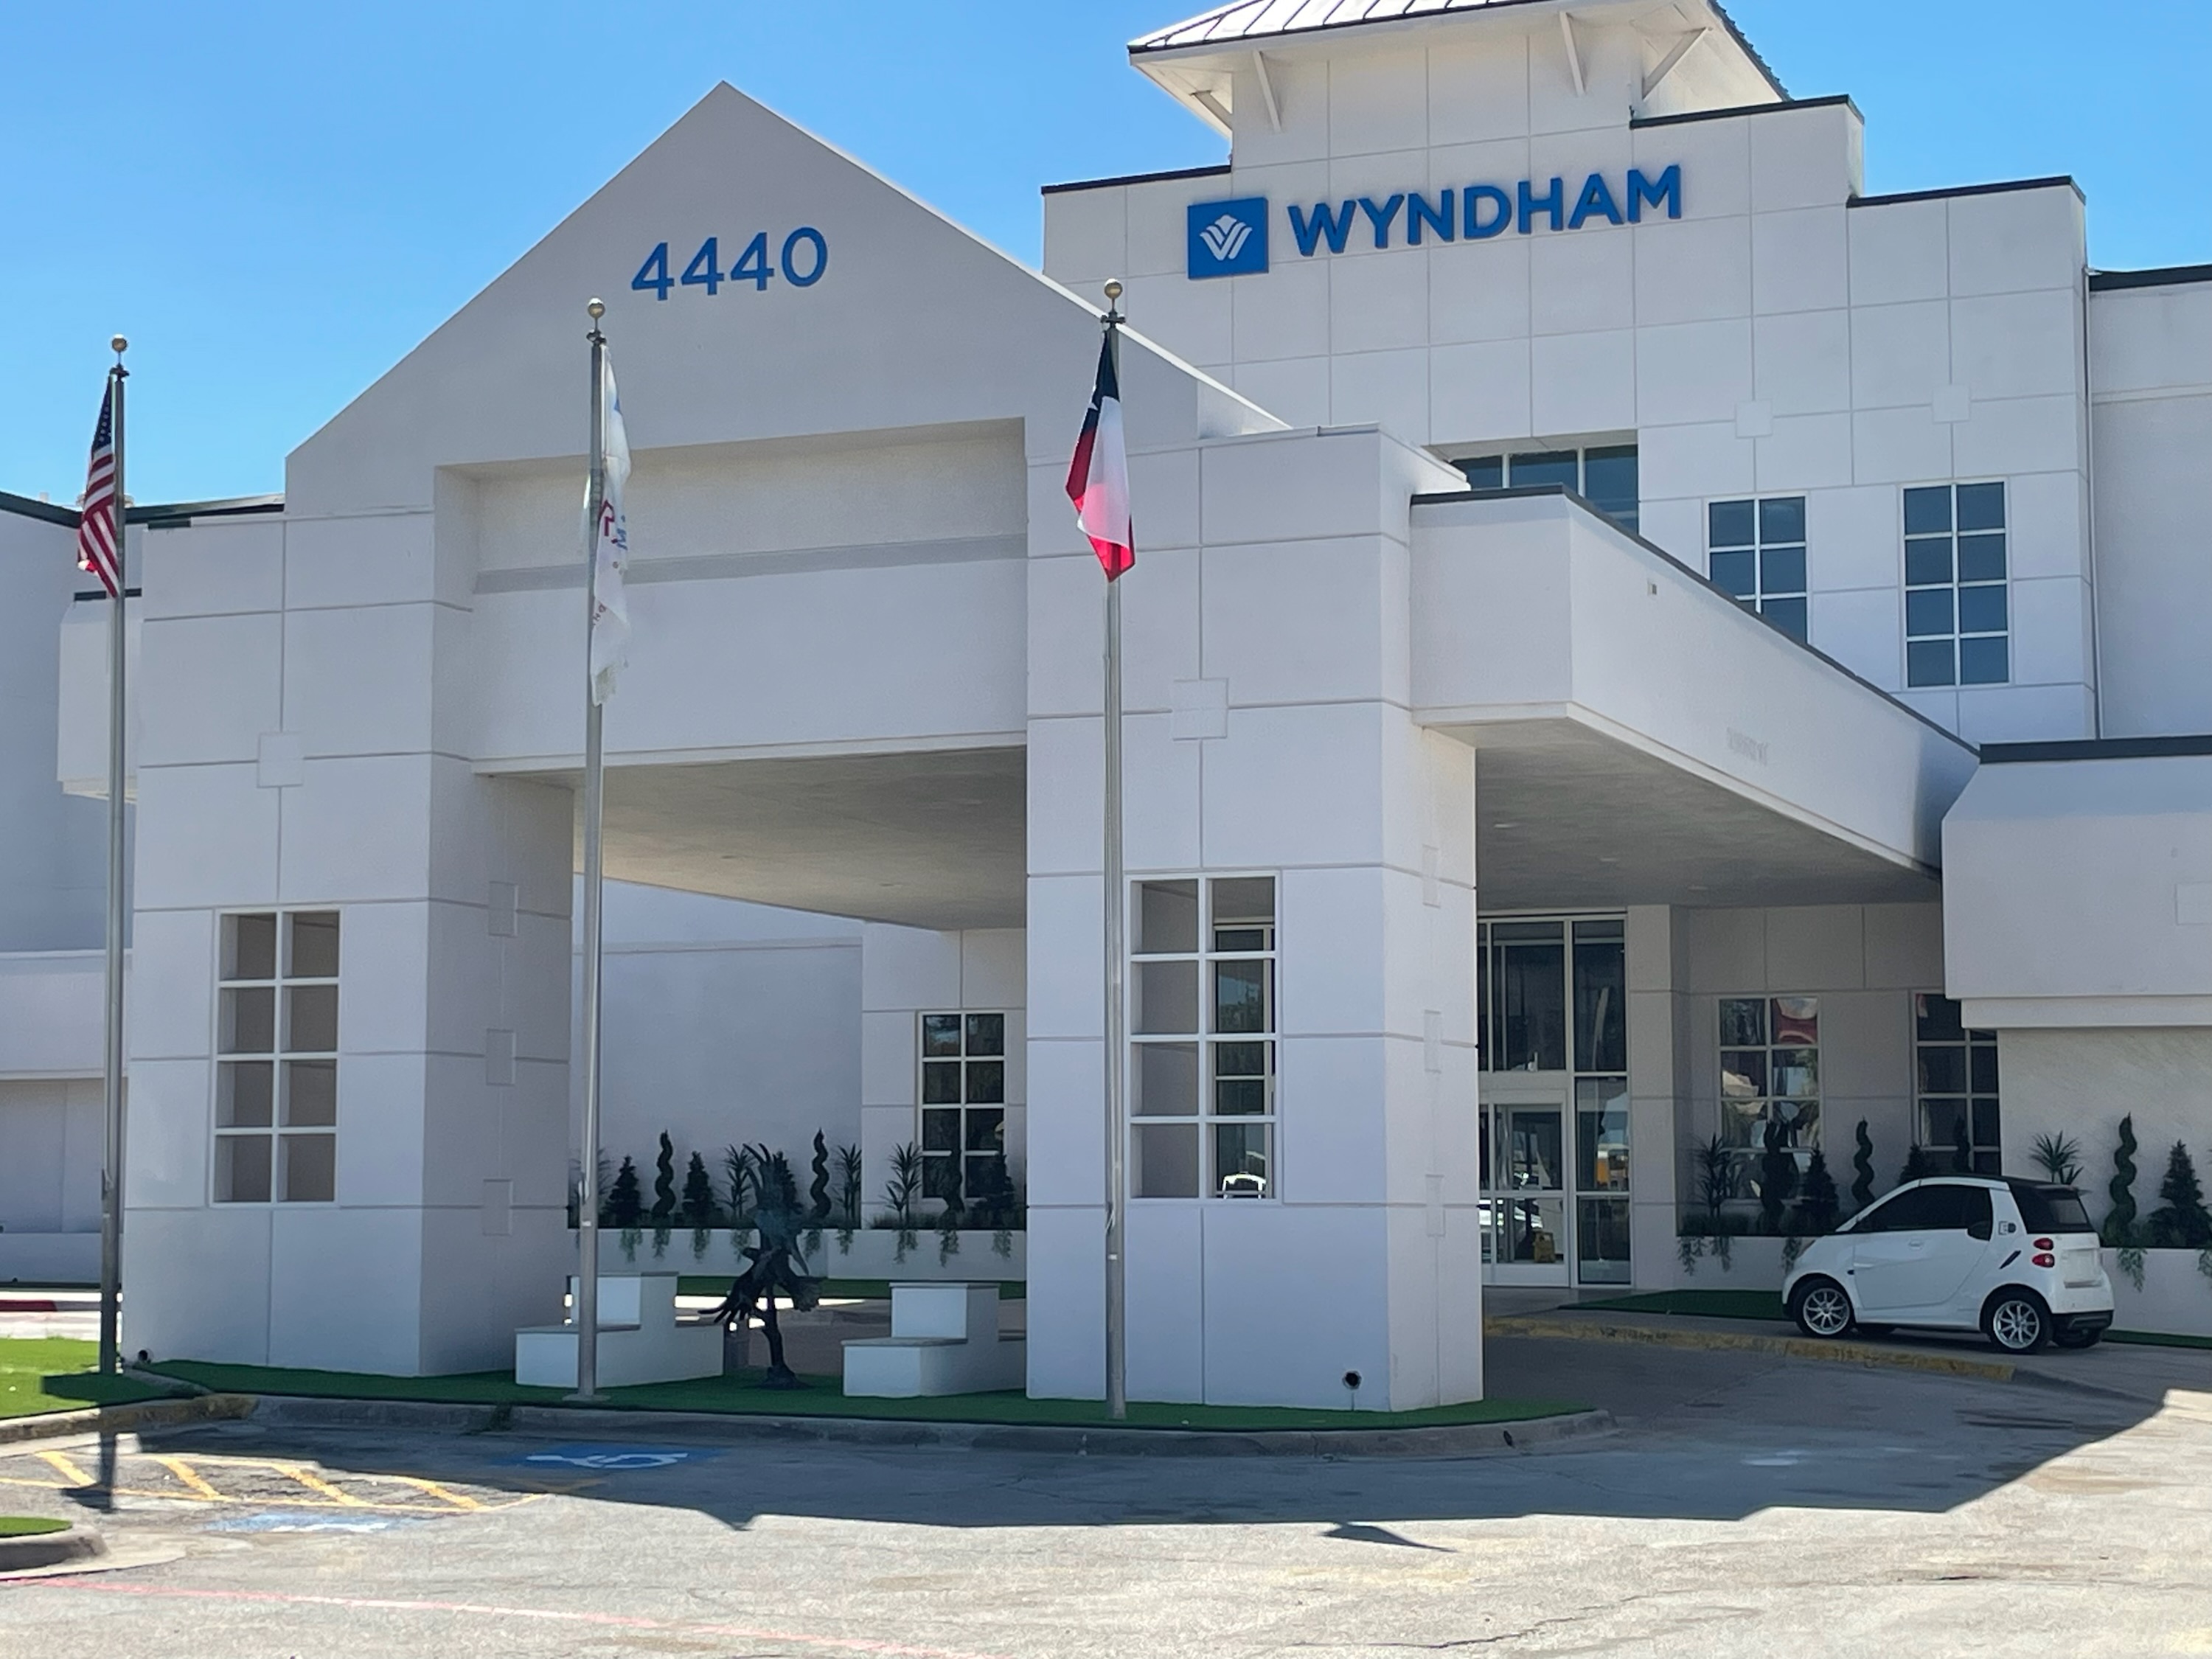 https://assets.simpleviewinc.com/simpleview/image/upload/crm/irving/wyndham-HOTEL-MAIN-ENTRANCE_B6D31112-5056-BF65-D6E27220C38ACA94-b6d310725056bf6_b6d3140f-5056-bf65-d618f5f525be057e.jpg